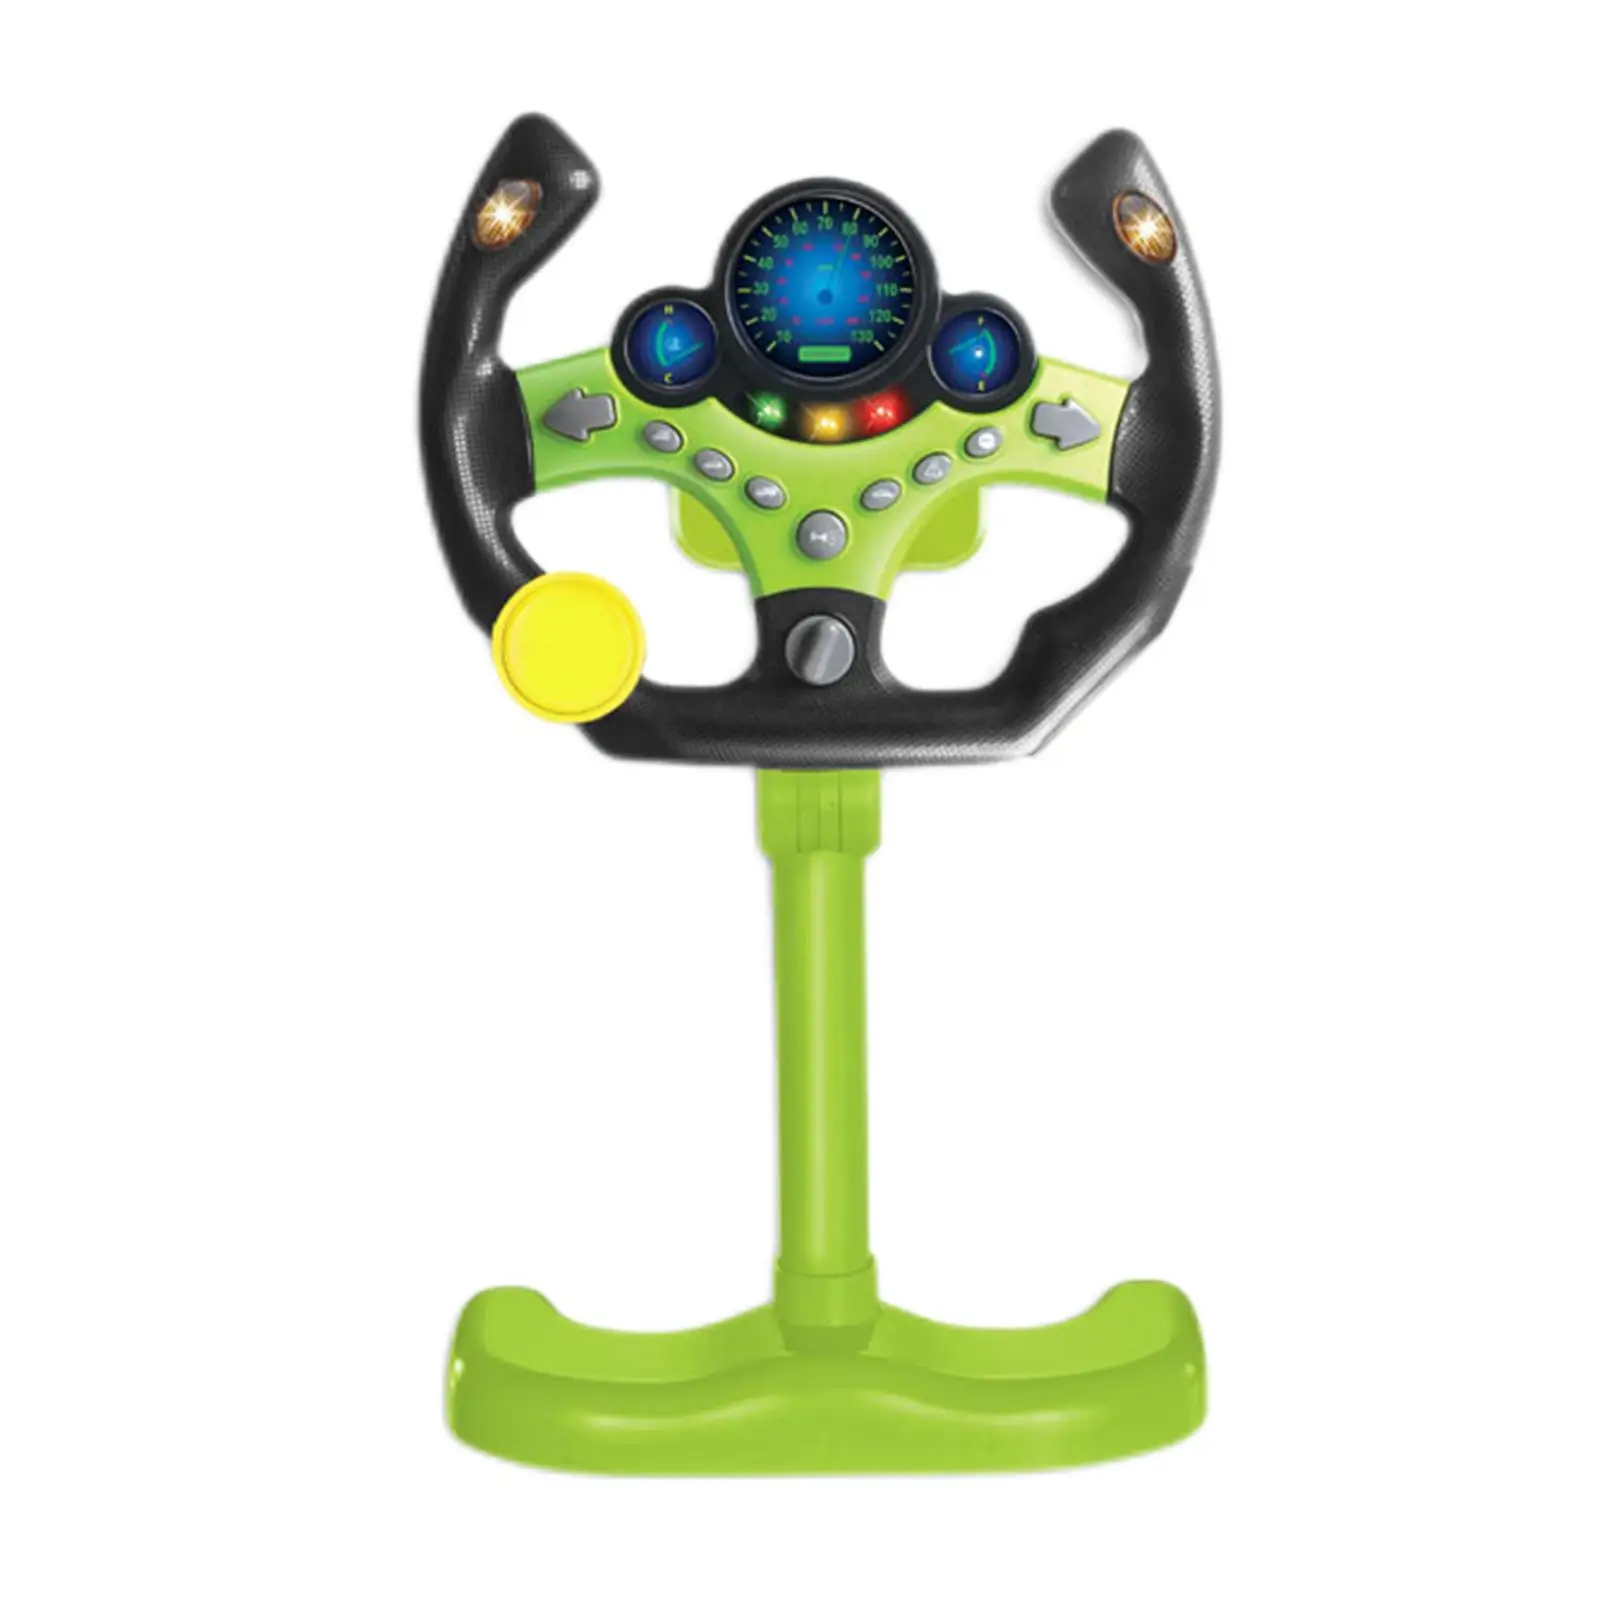 Simulated Steering Wheel for Kids with Light Gifts Sounding Toy